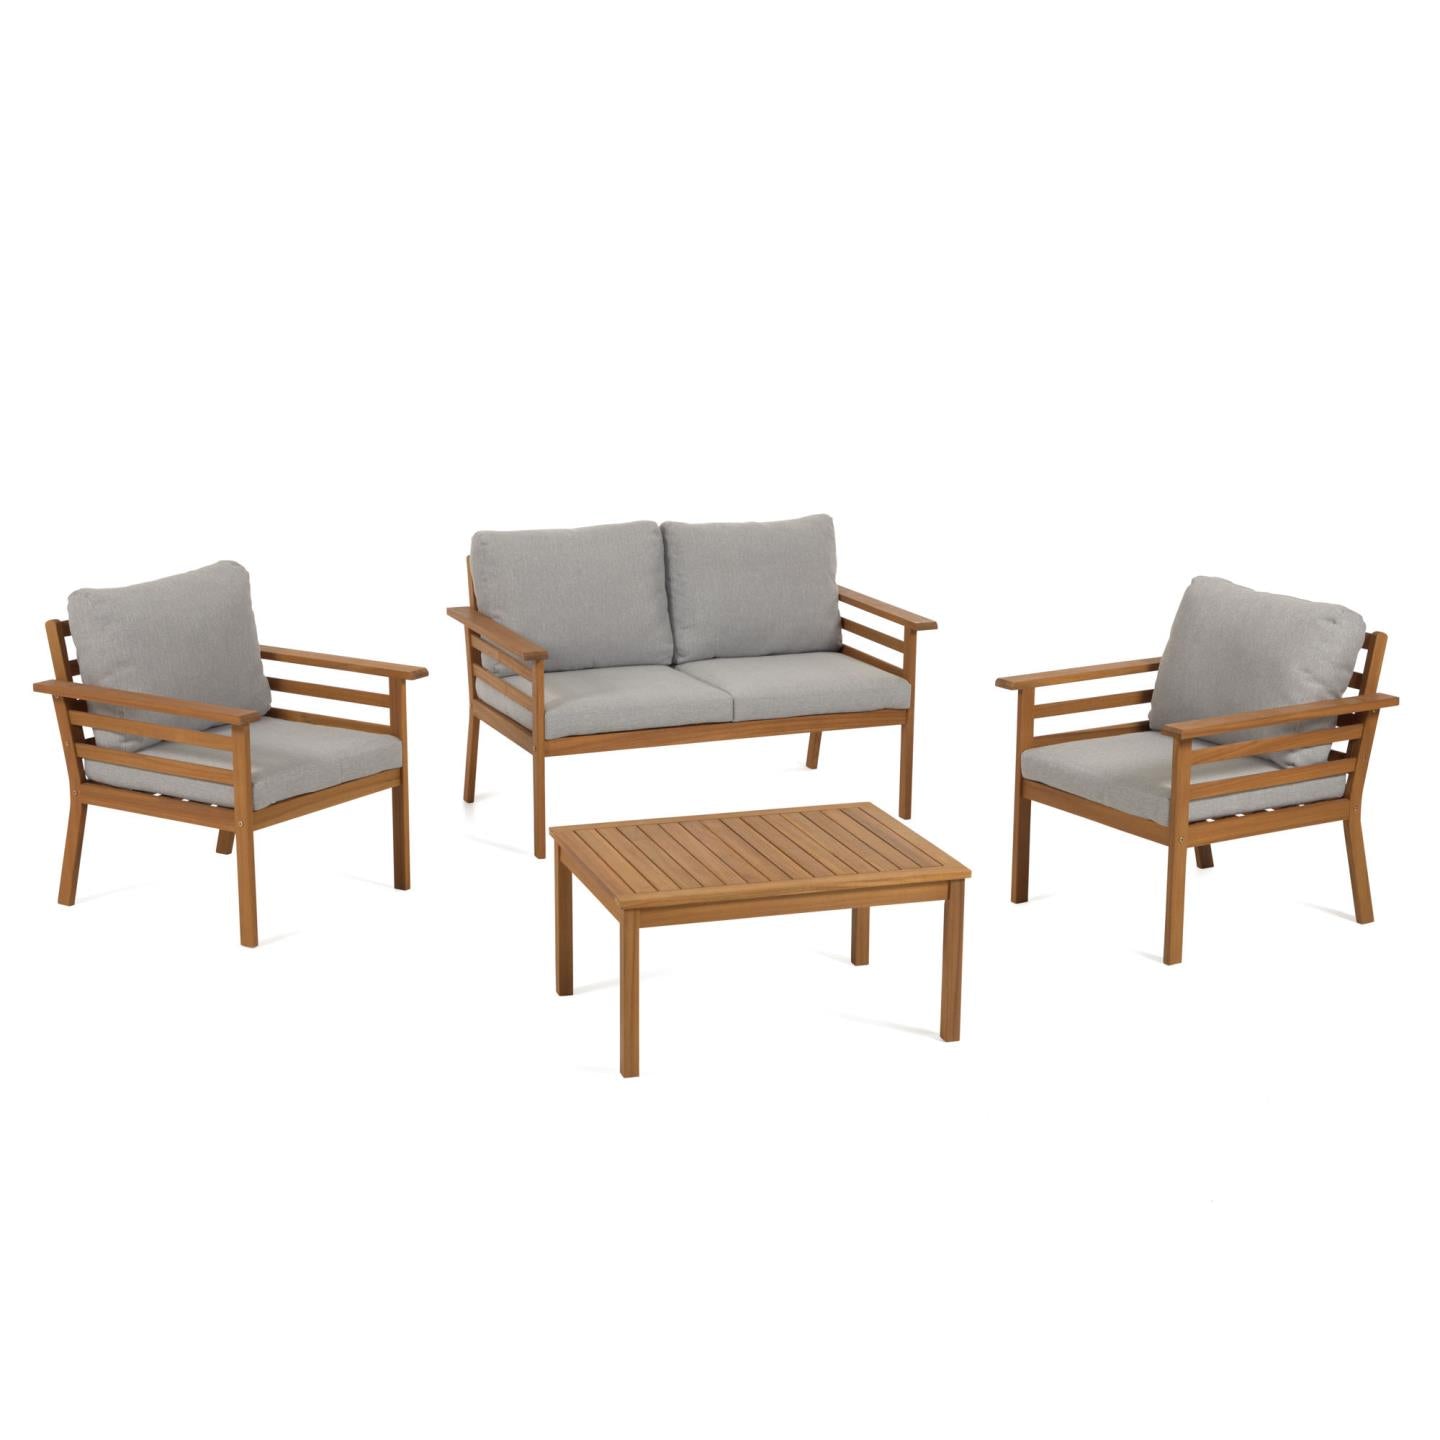 Vilma outdoor set of sofa, 2 chairs and coffee table of solid acacia wood 100% FSC